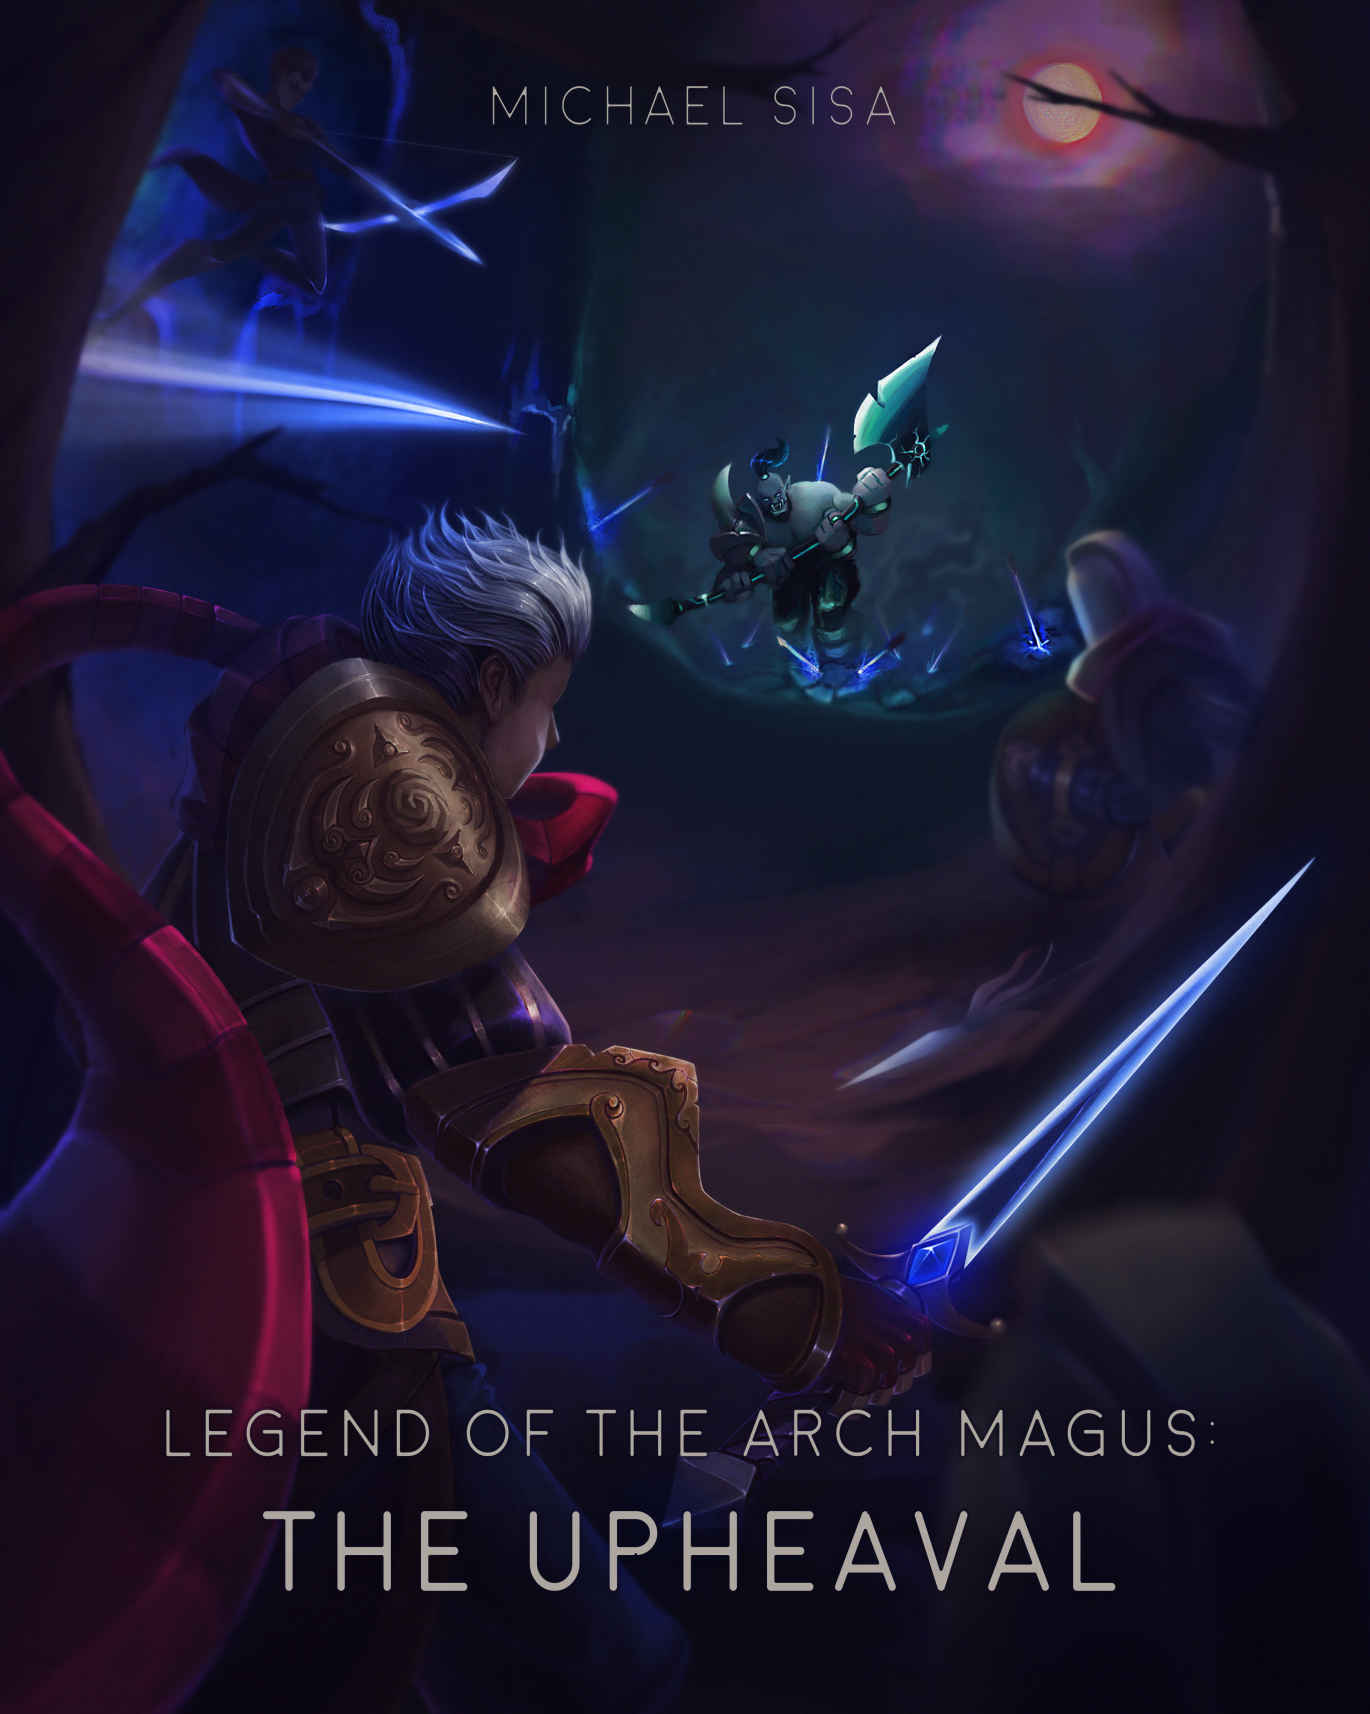 Legend of the Arch Magus: The Upheaval